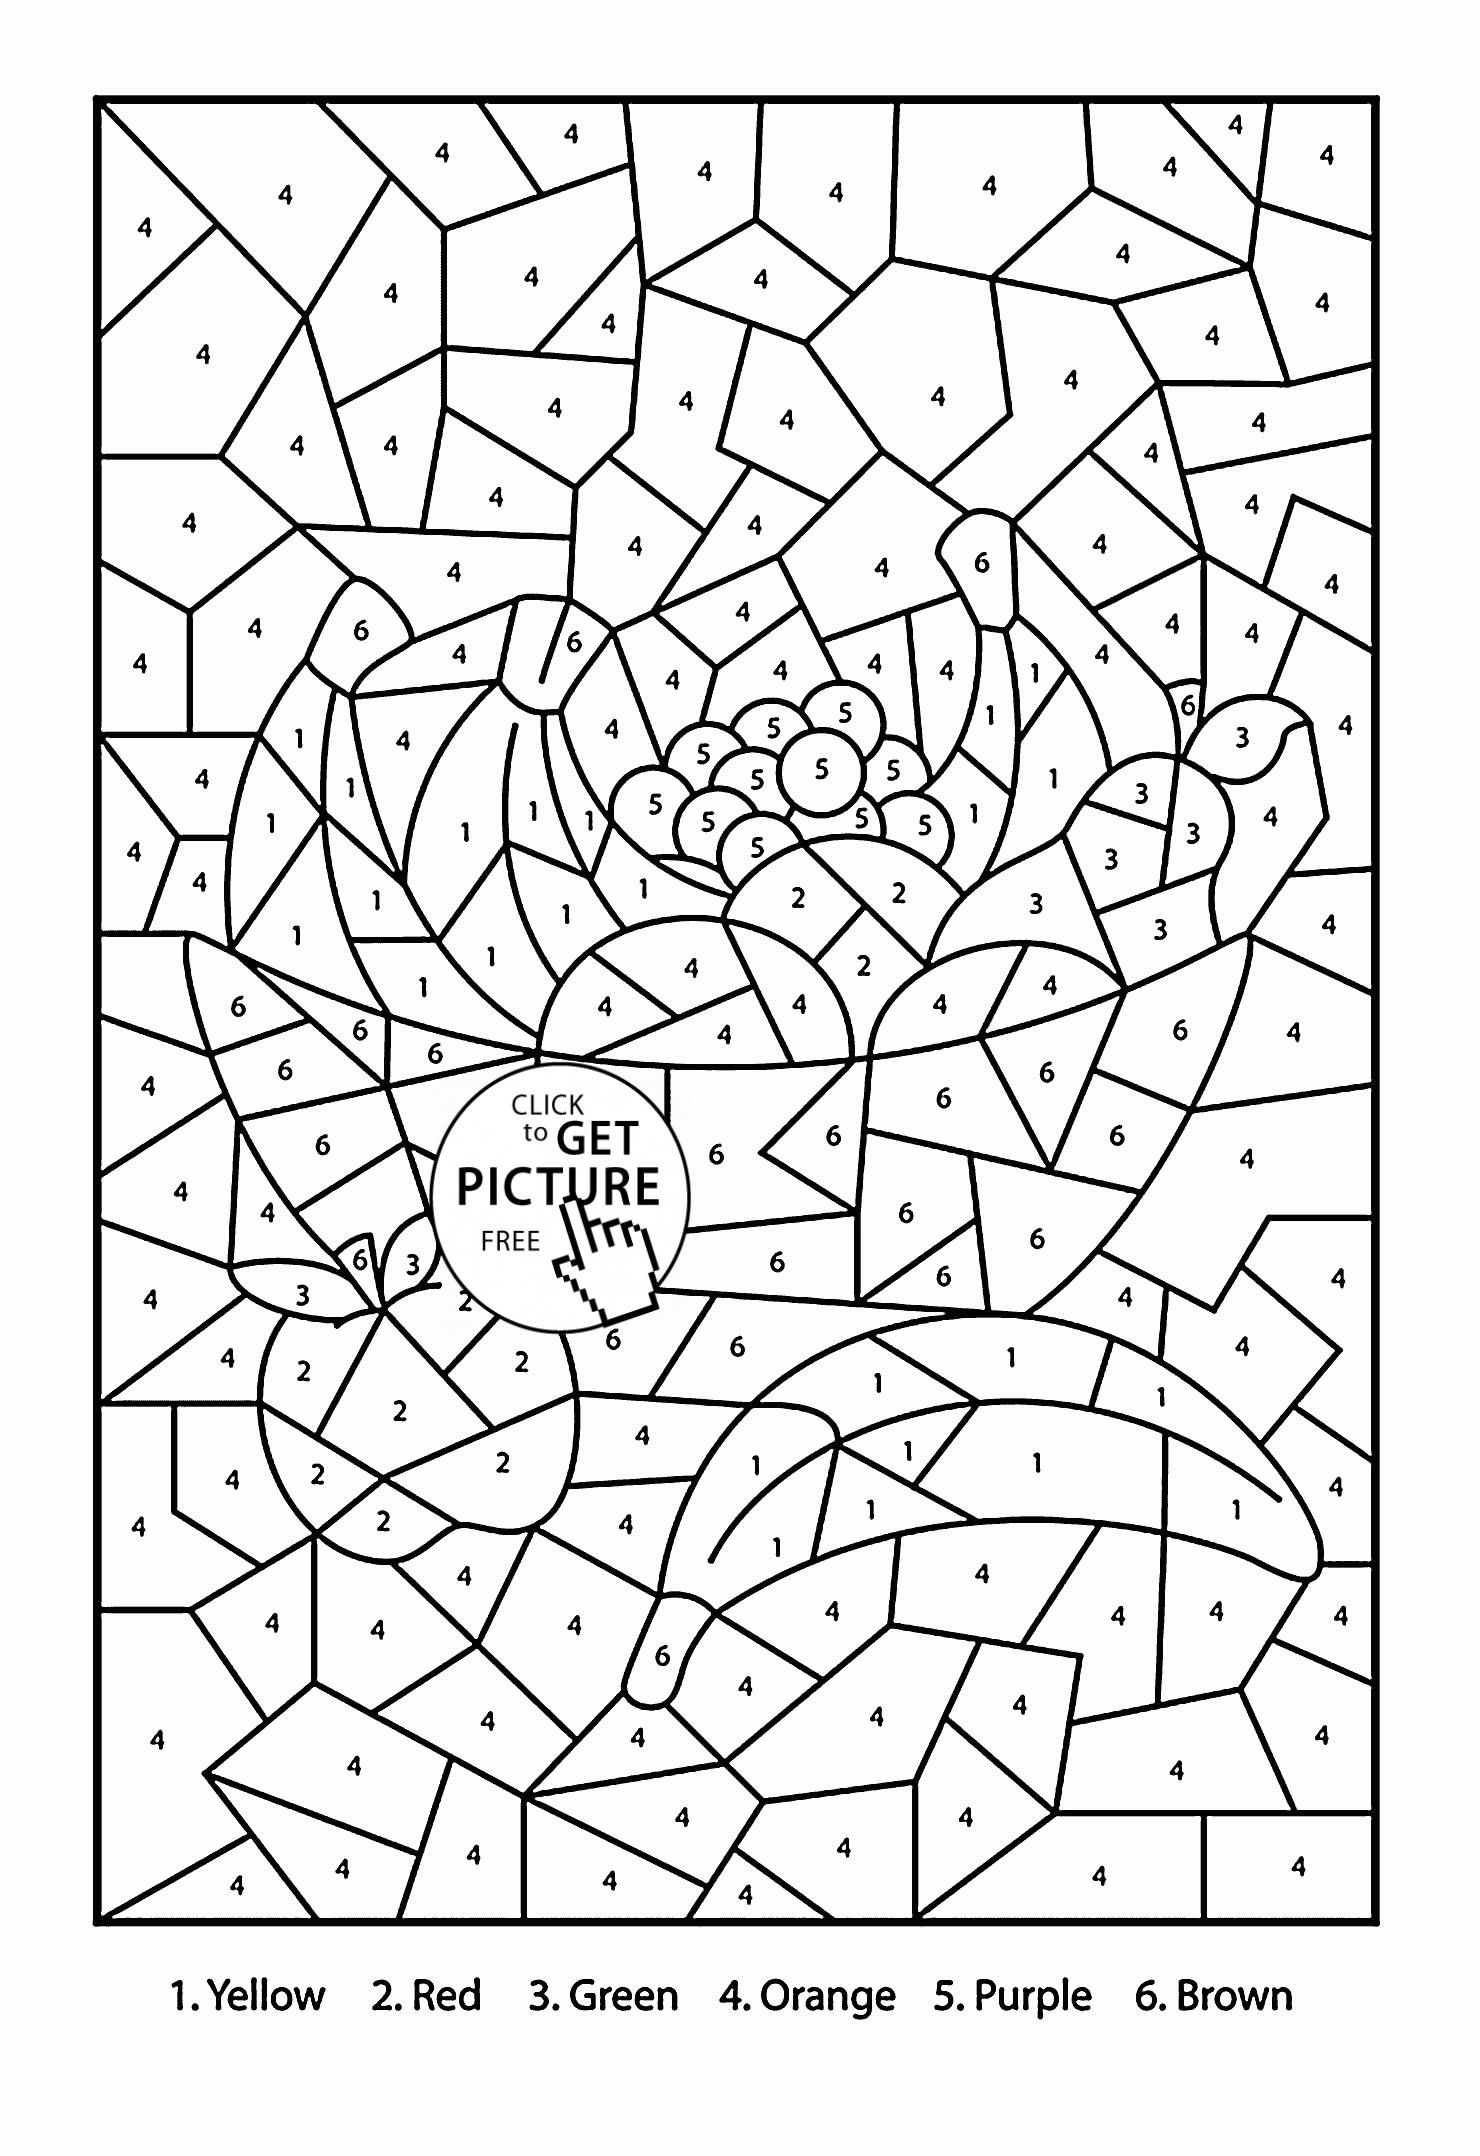 colouring for adults by numbers count by number coloring pages free coloring pages by for numbers adults colouring 